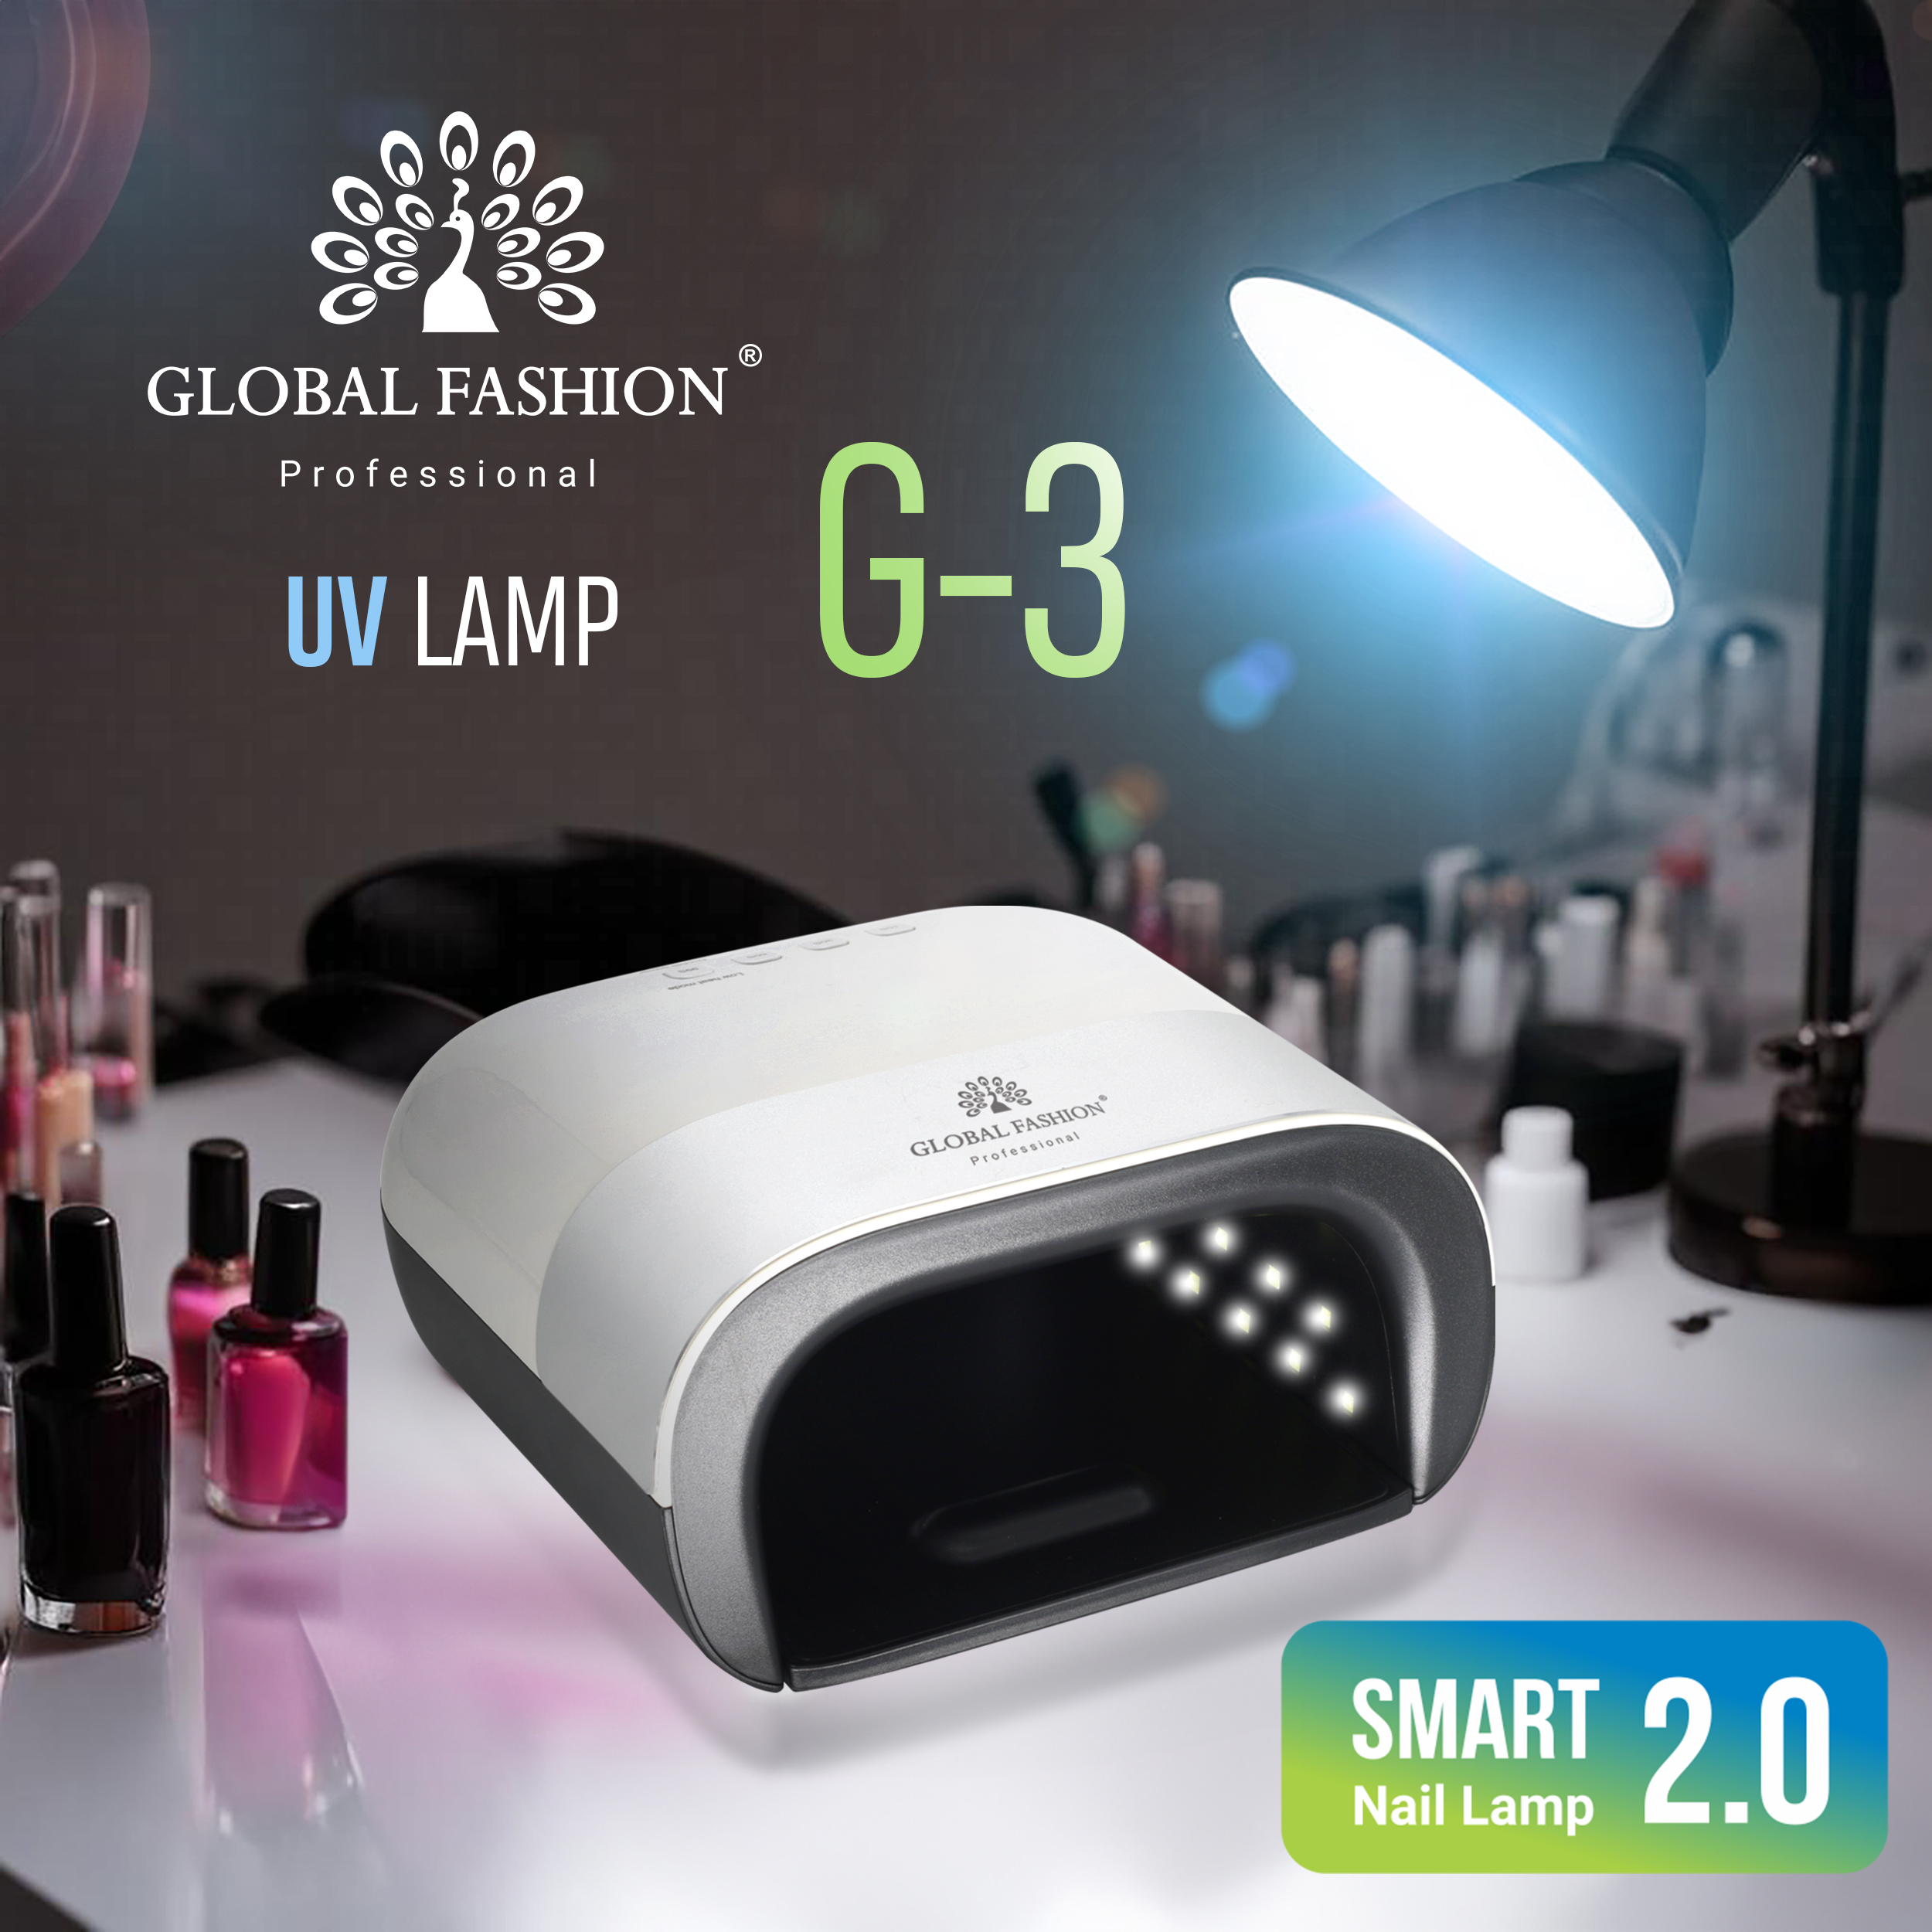 Professional UV LED nail lamp with timer and sensors 48W G-3 Global Fashion: innovative quality product